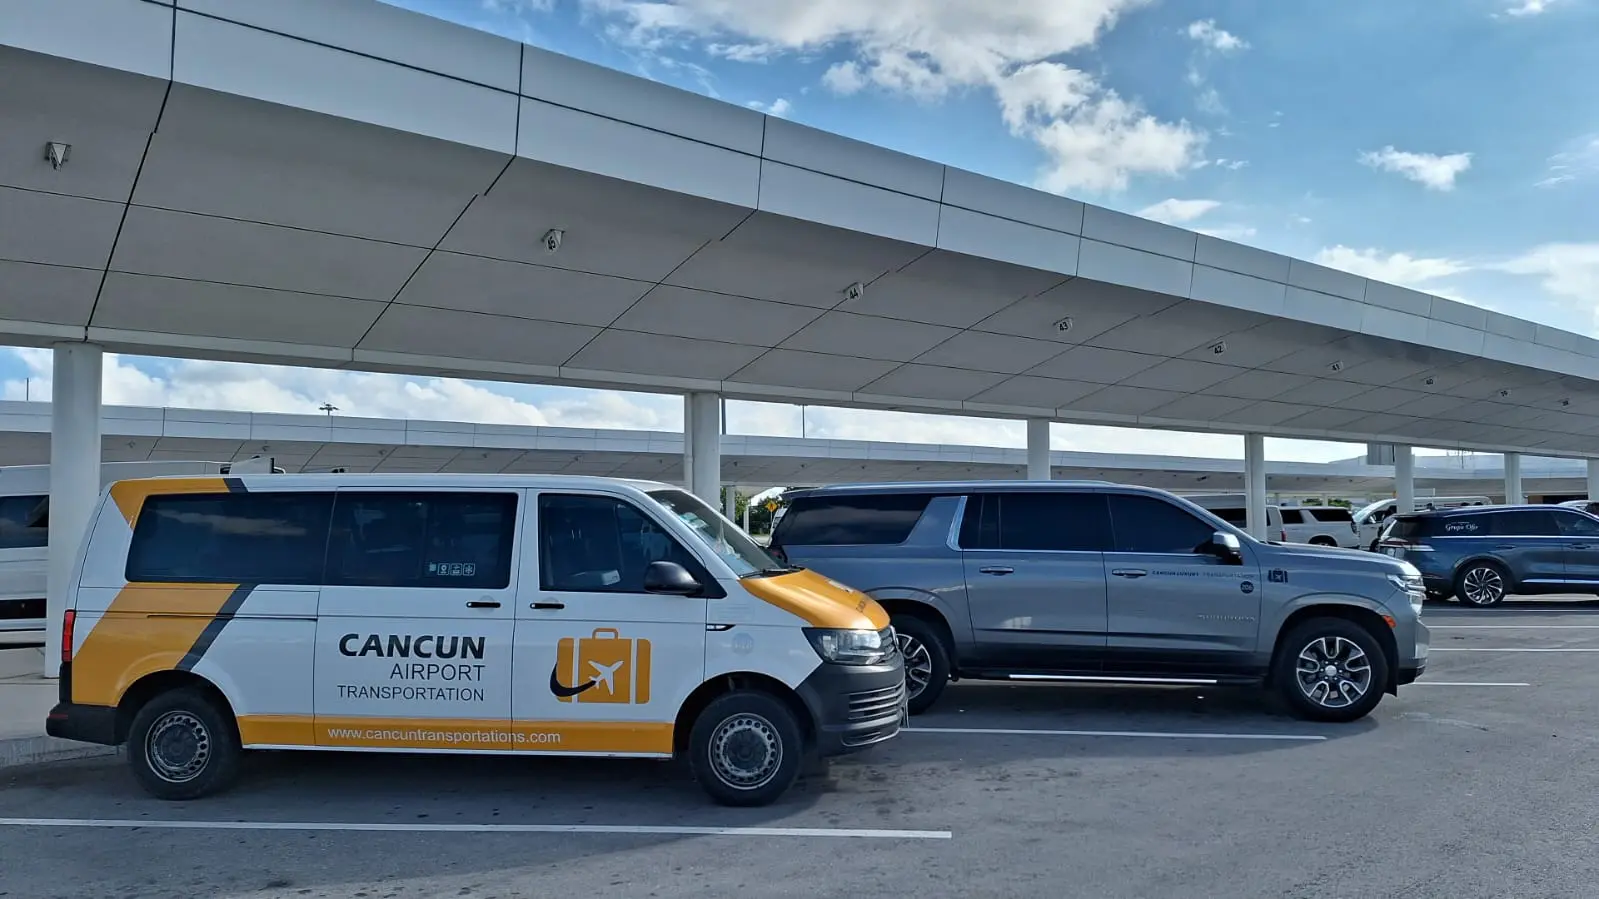 Pick up at the Airport in Cancun by Cancun Airport Transportation 